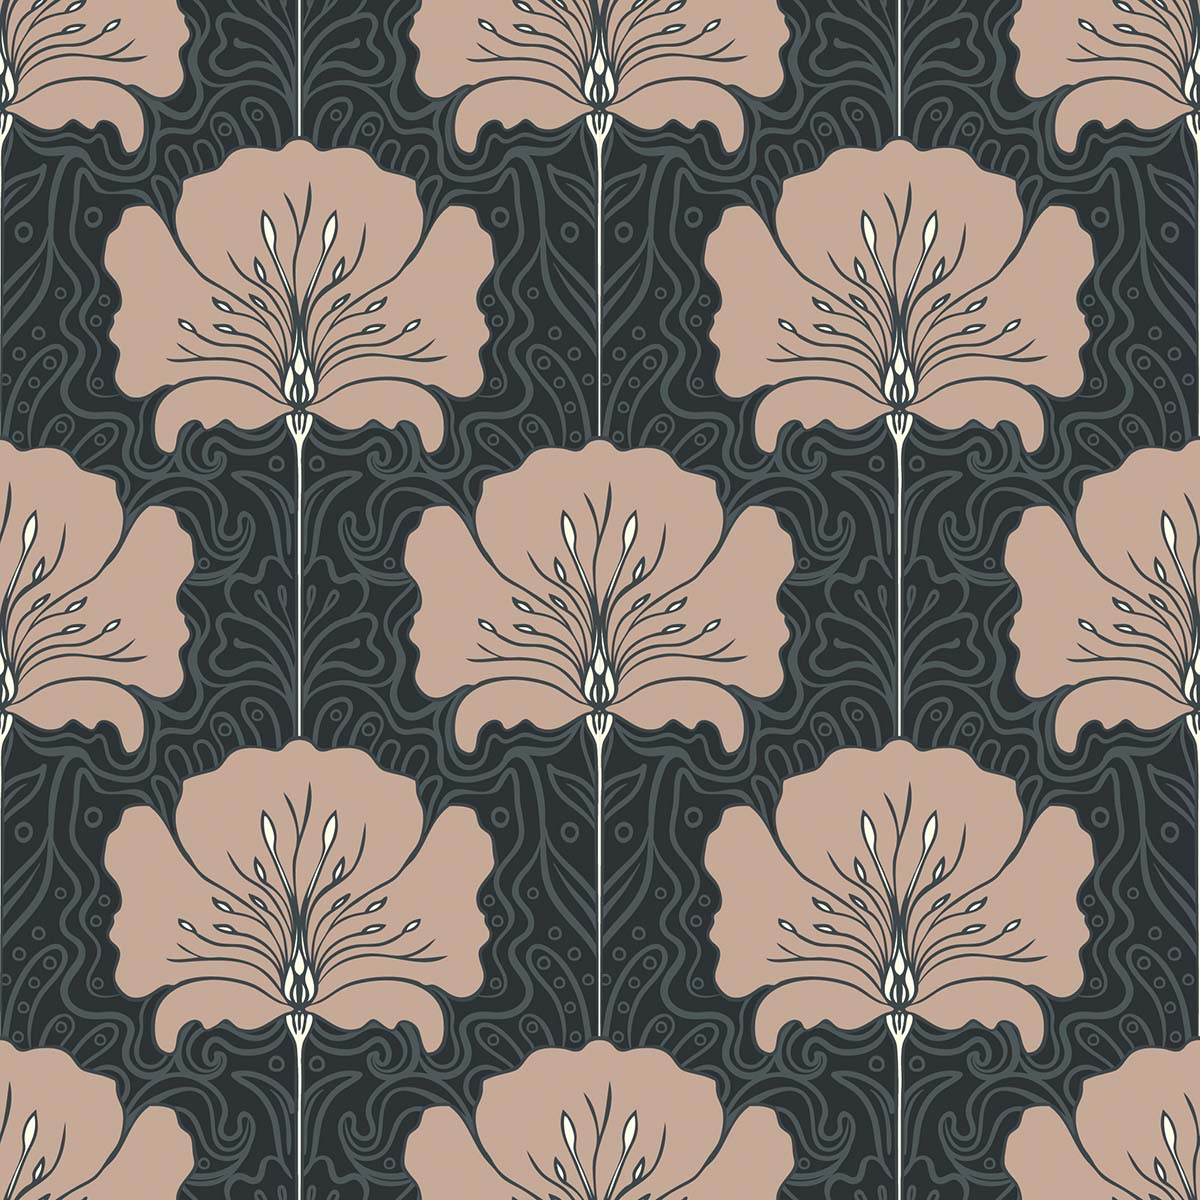 A pattern of flowers on a black background